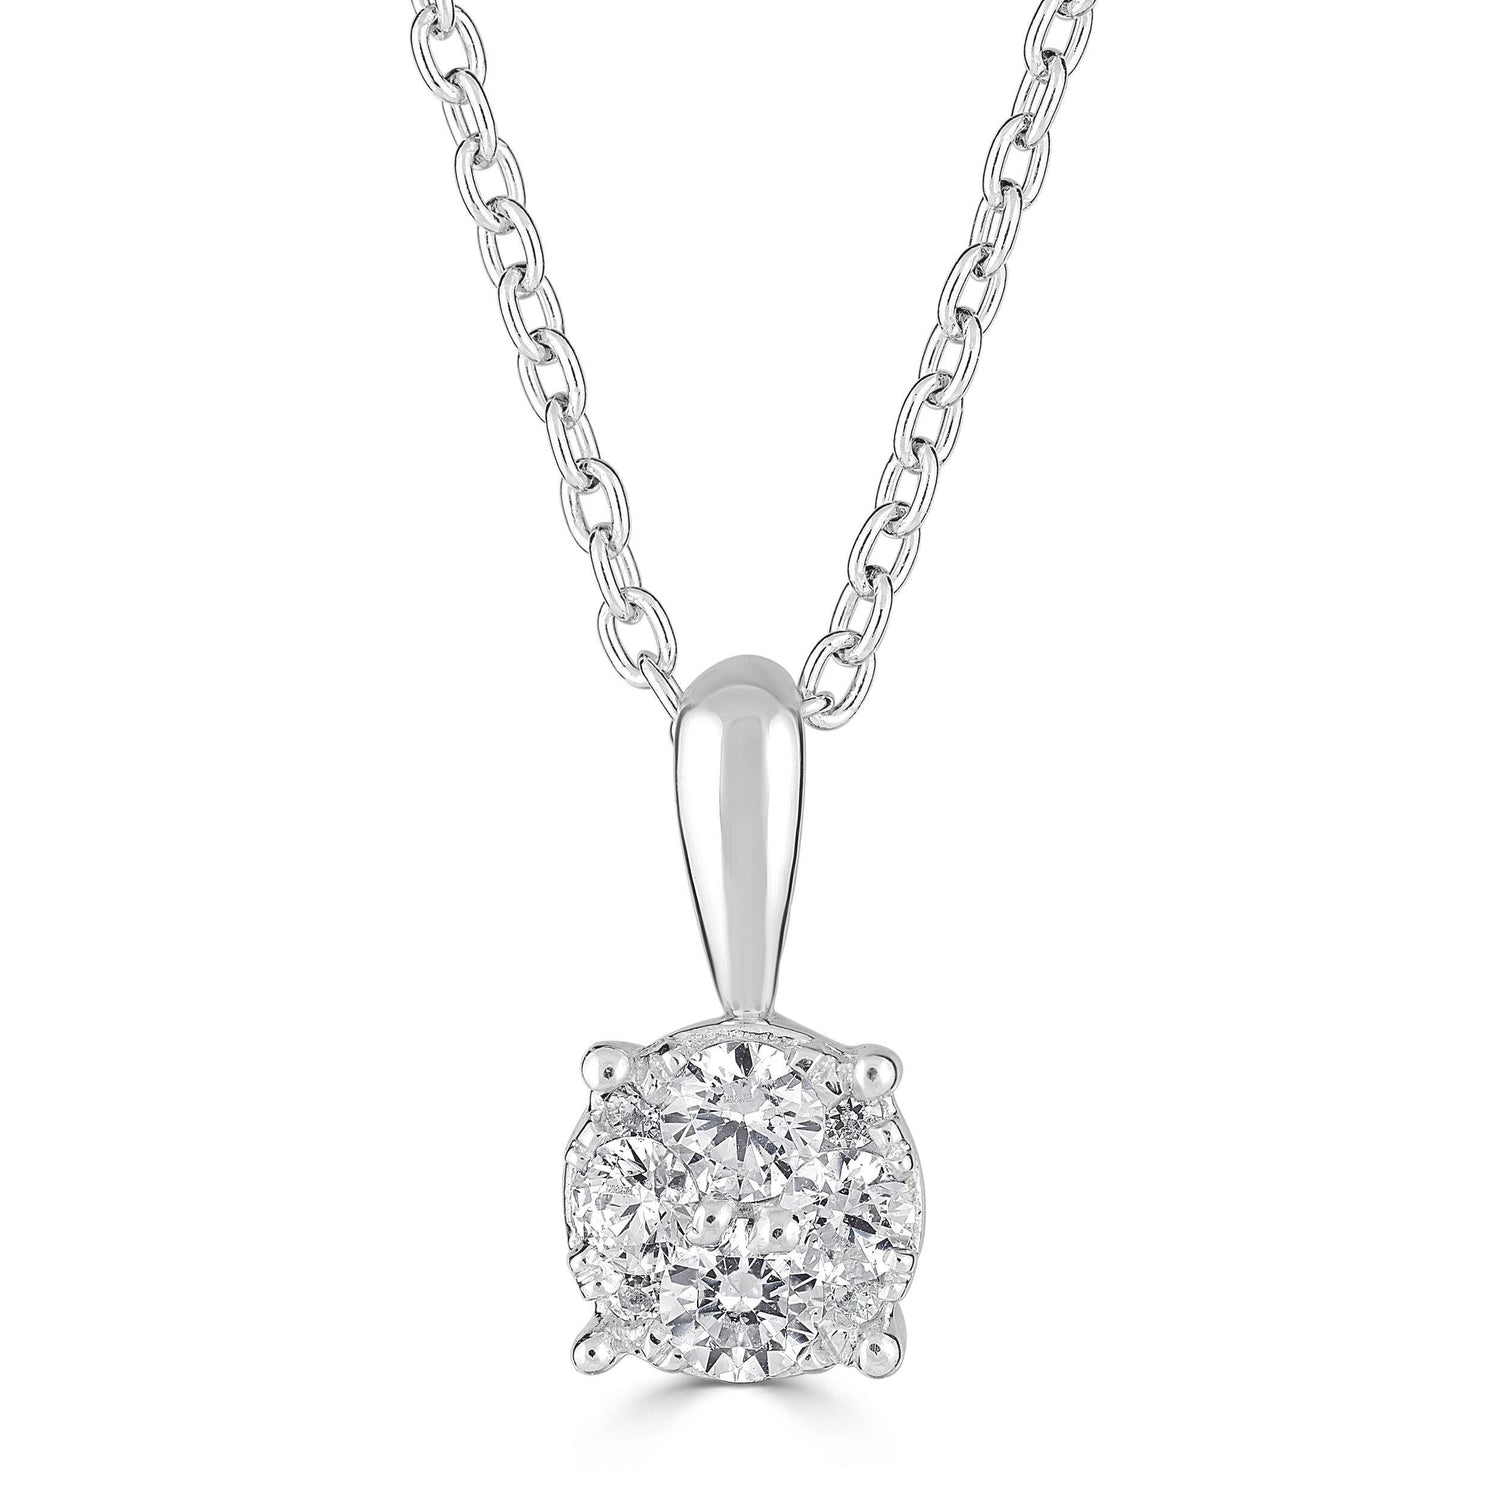 1/4CT.TW of Diamonds to Create a Grander look, Uniquely crafted in Sterling Silver - Fifth and Fine